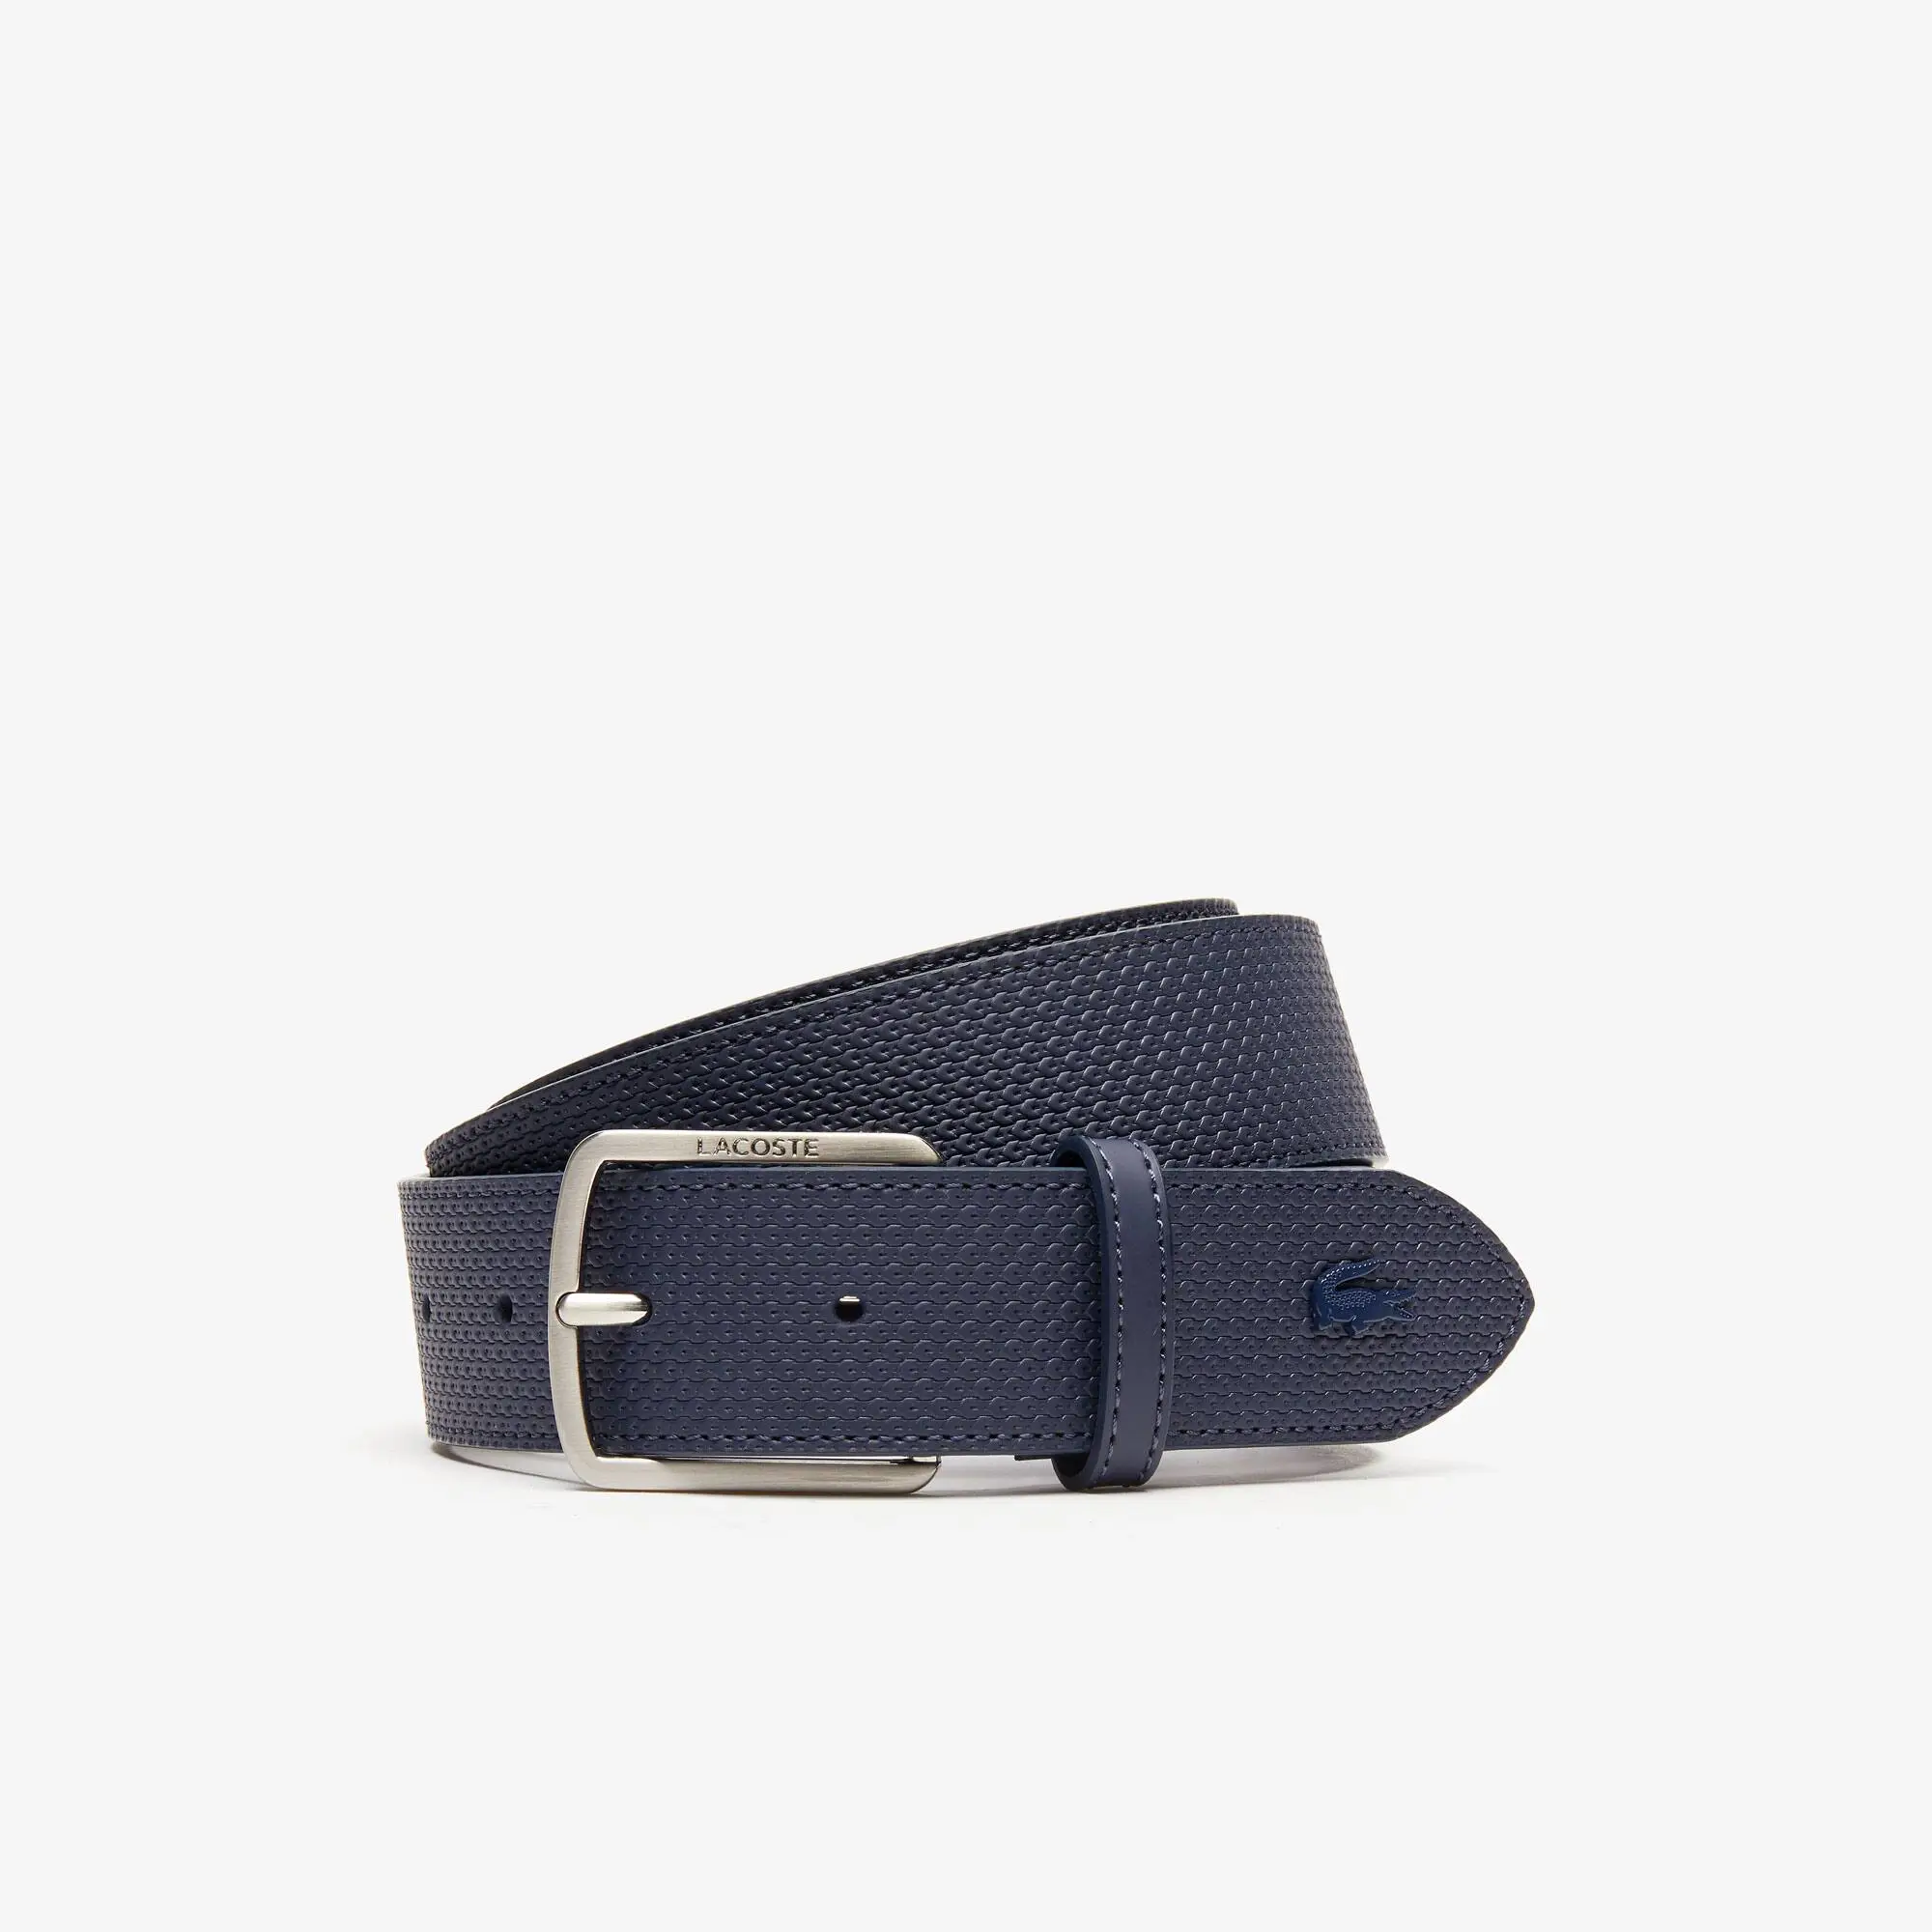 Lacoste Men's Engraved Buckle Textured Leather Belt. 1